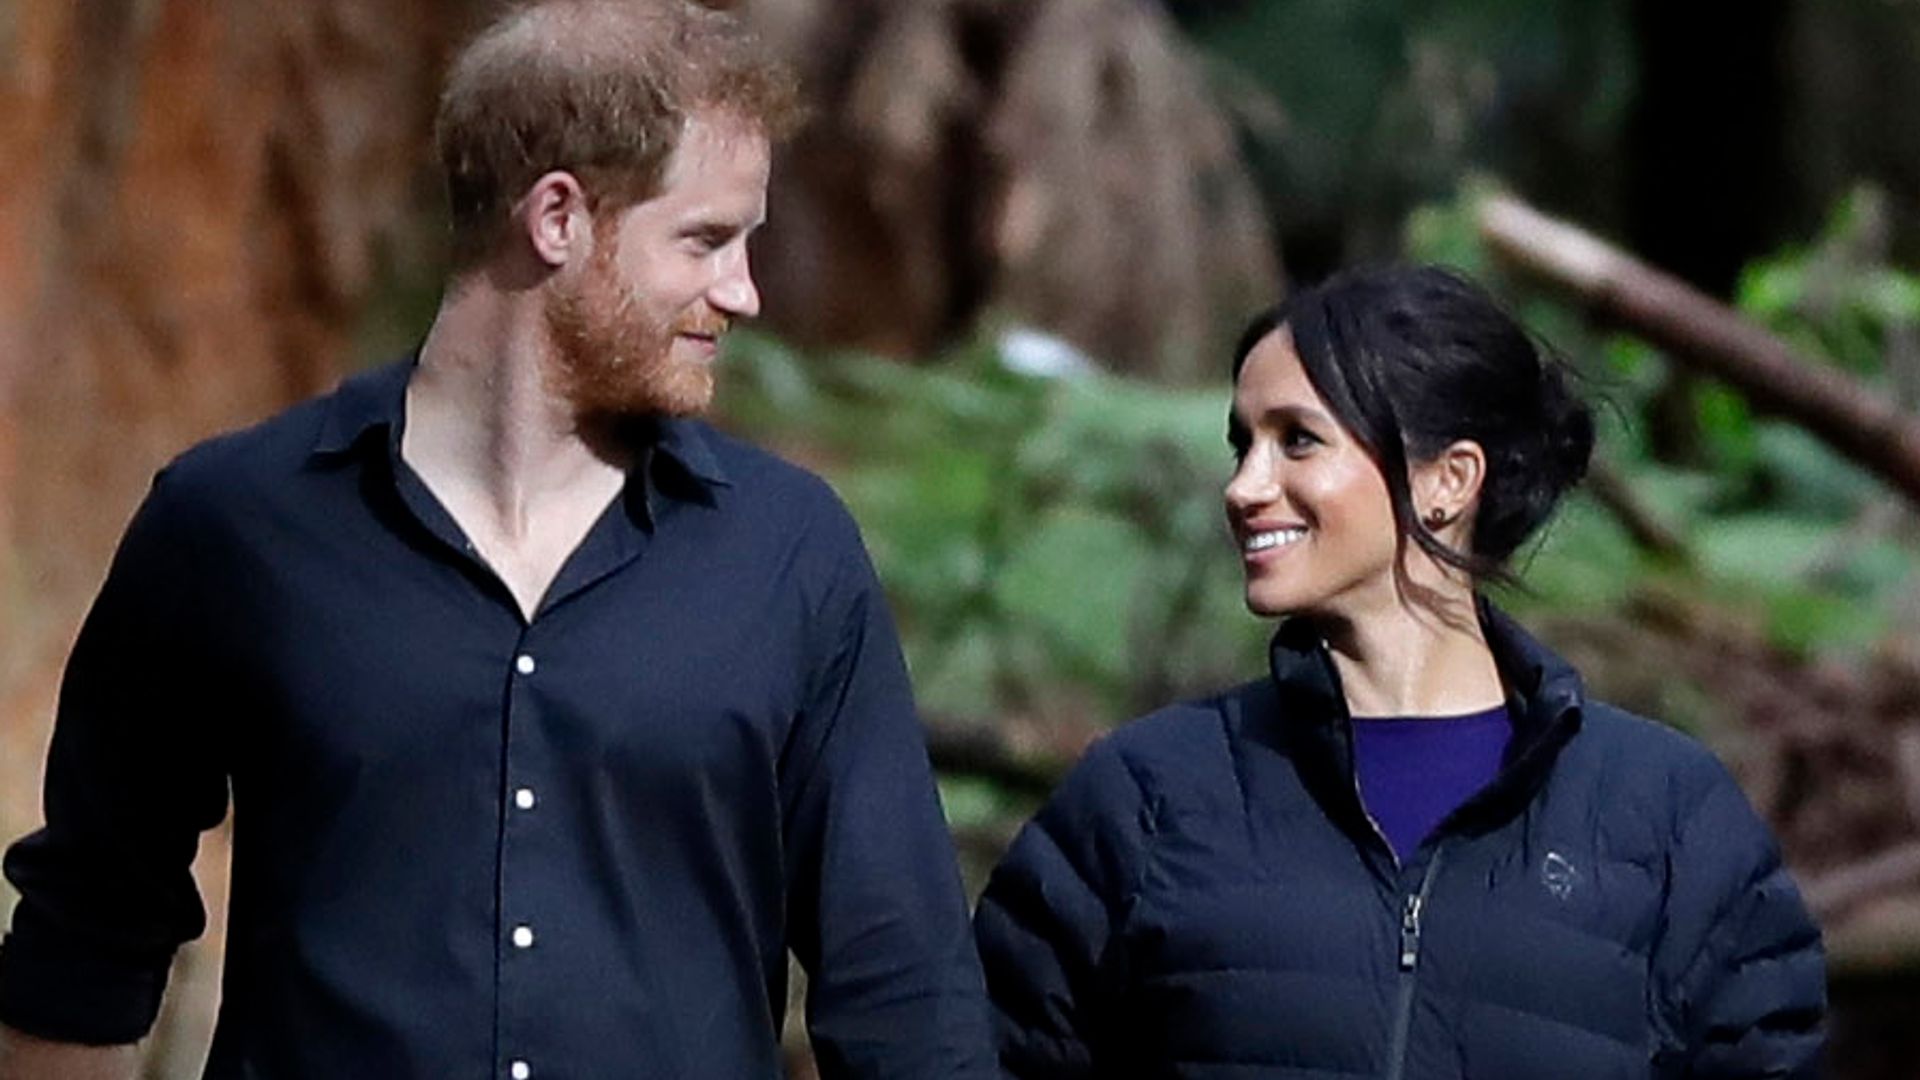 Prince Harry and Meghan walking through trees looking at each other